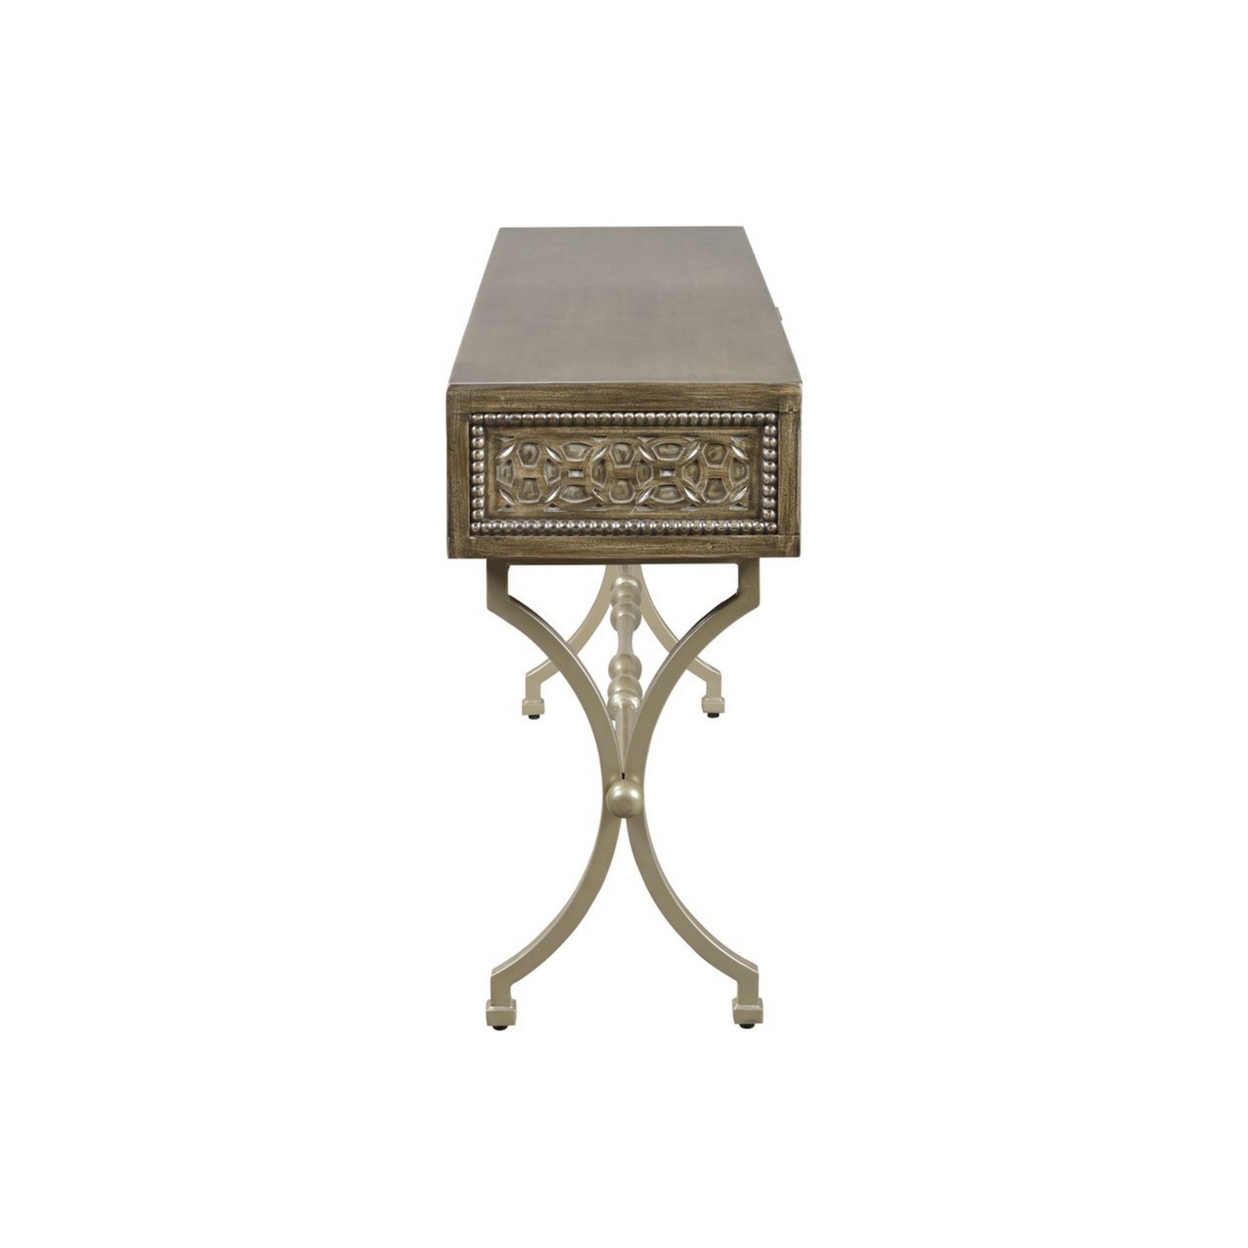 1 Drawer Console Sofa Table With Medallion Pattern And X Shaped Legs, Brown- Saltoro Sherpi